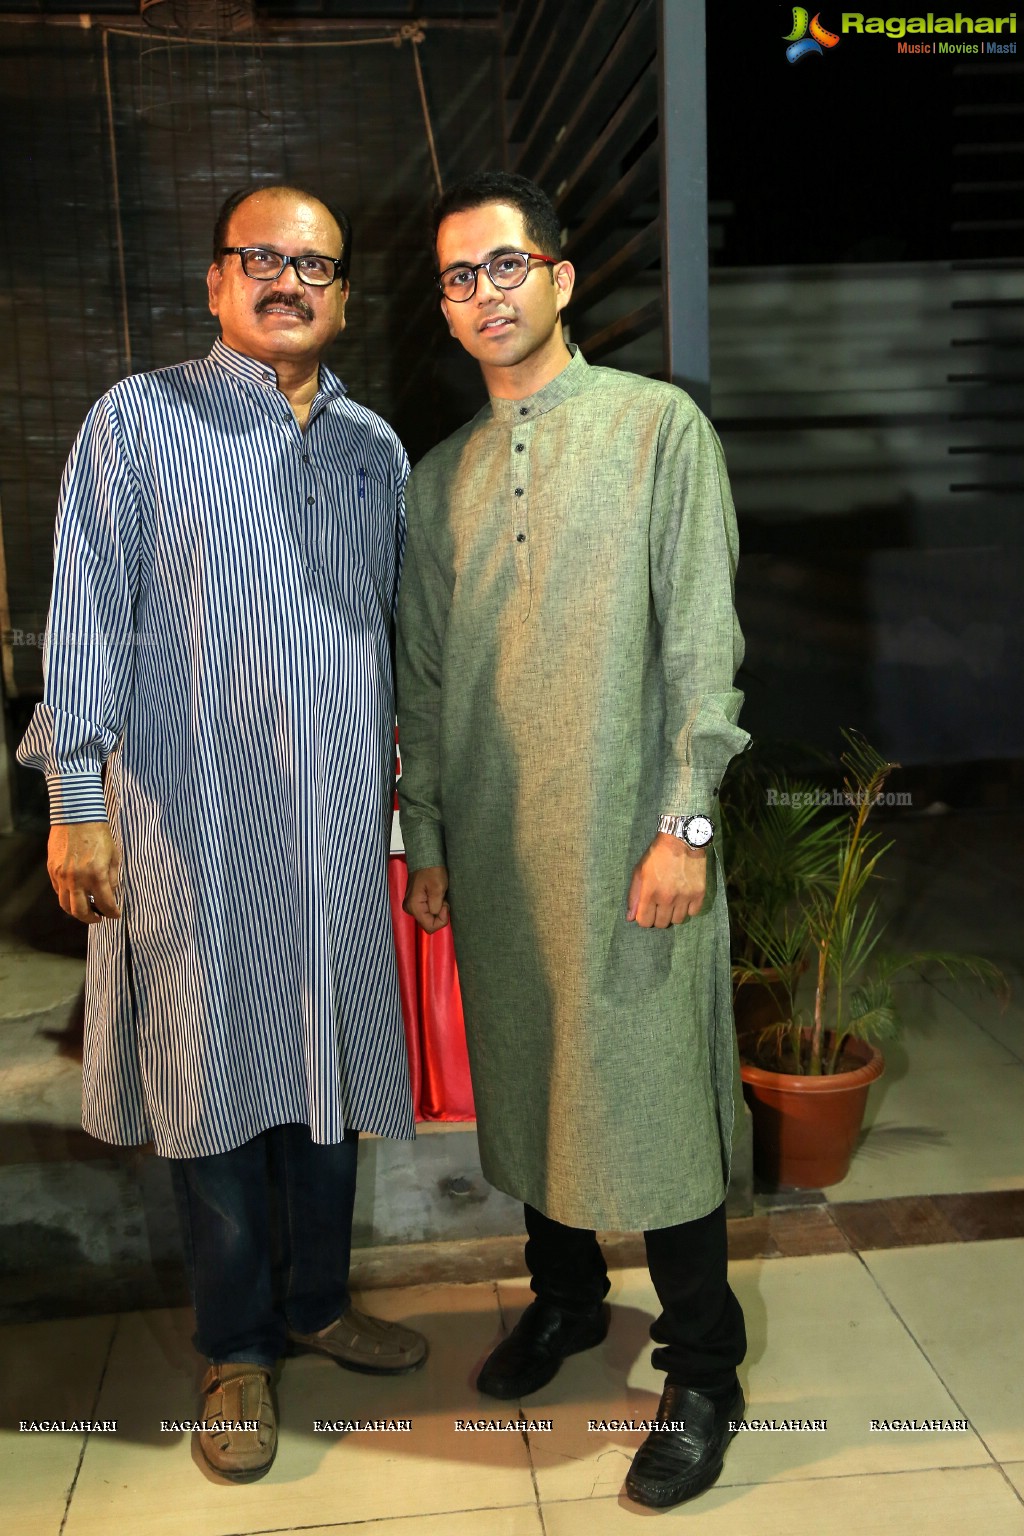 Sufi Night by Irshad Ali at The Earth, Hyderabad